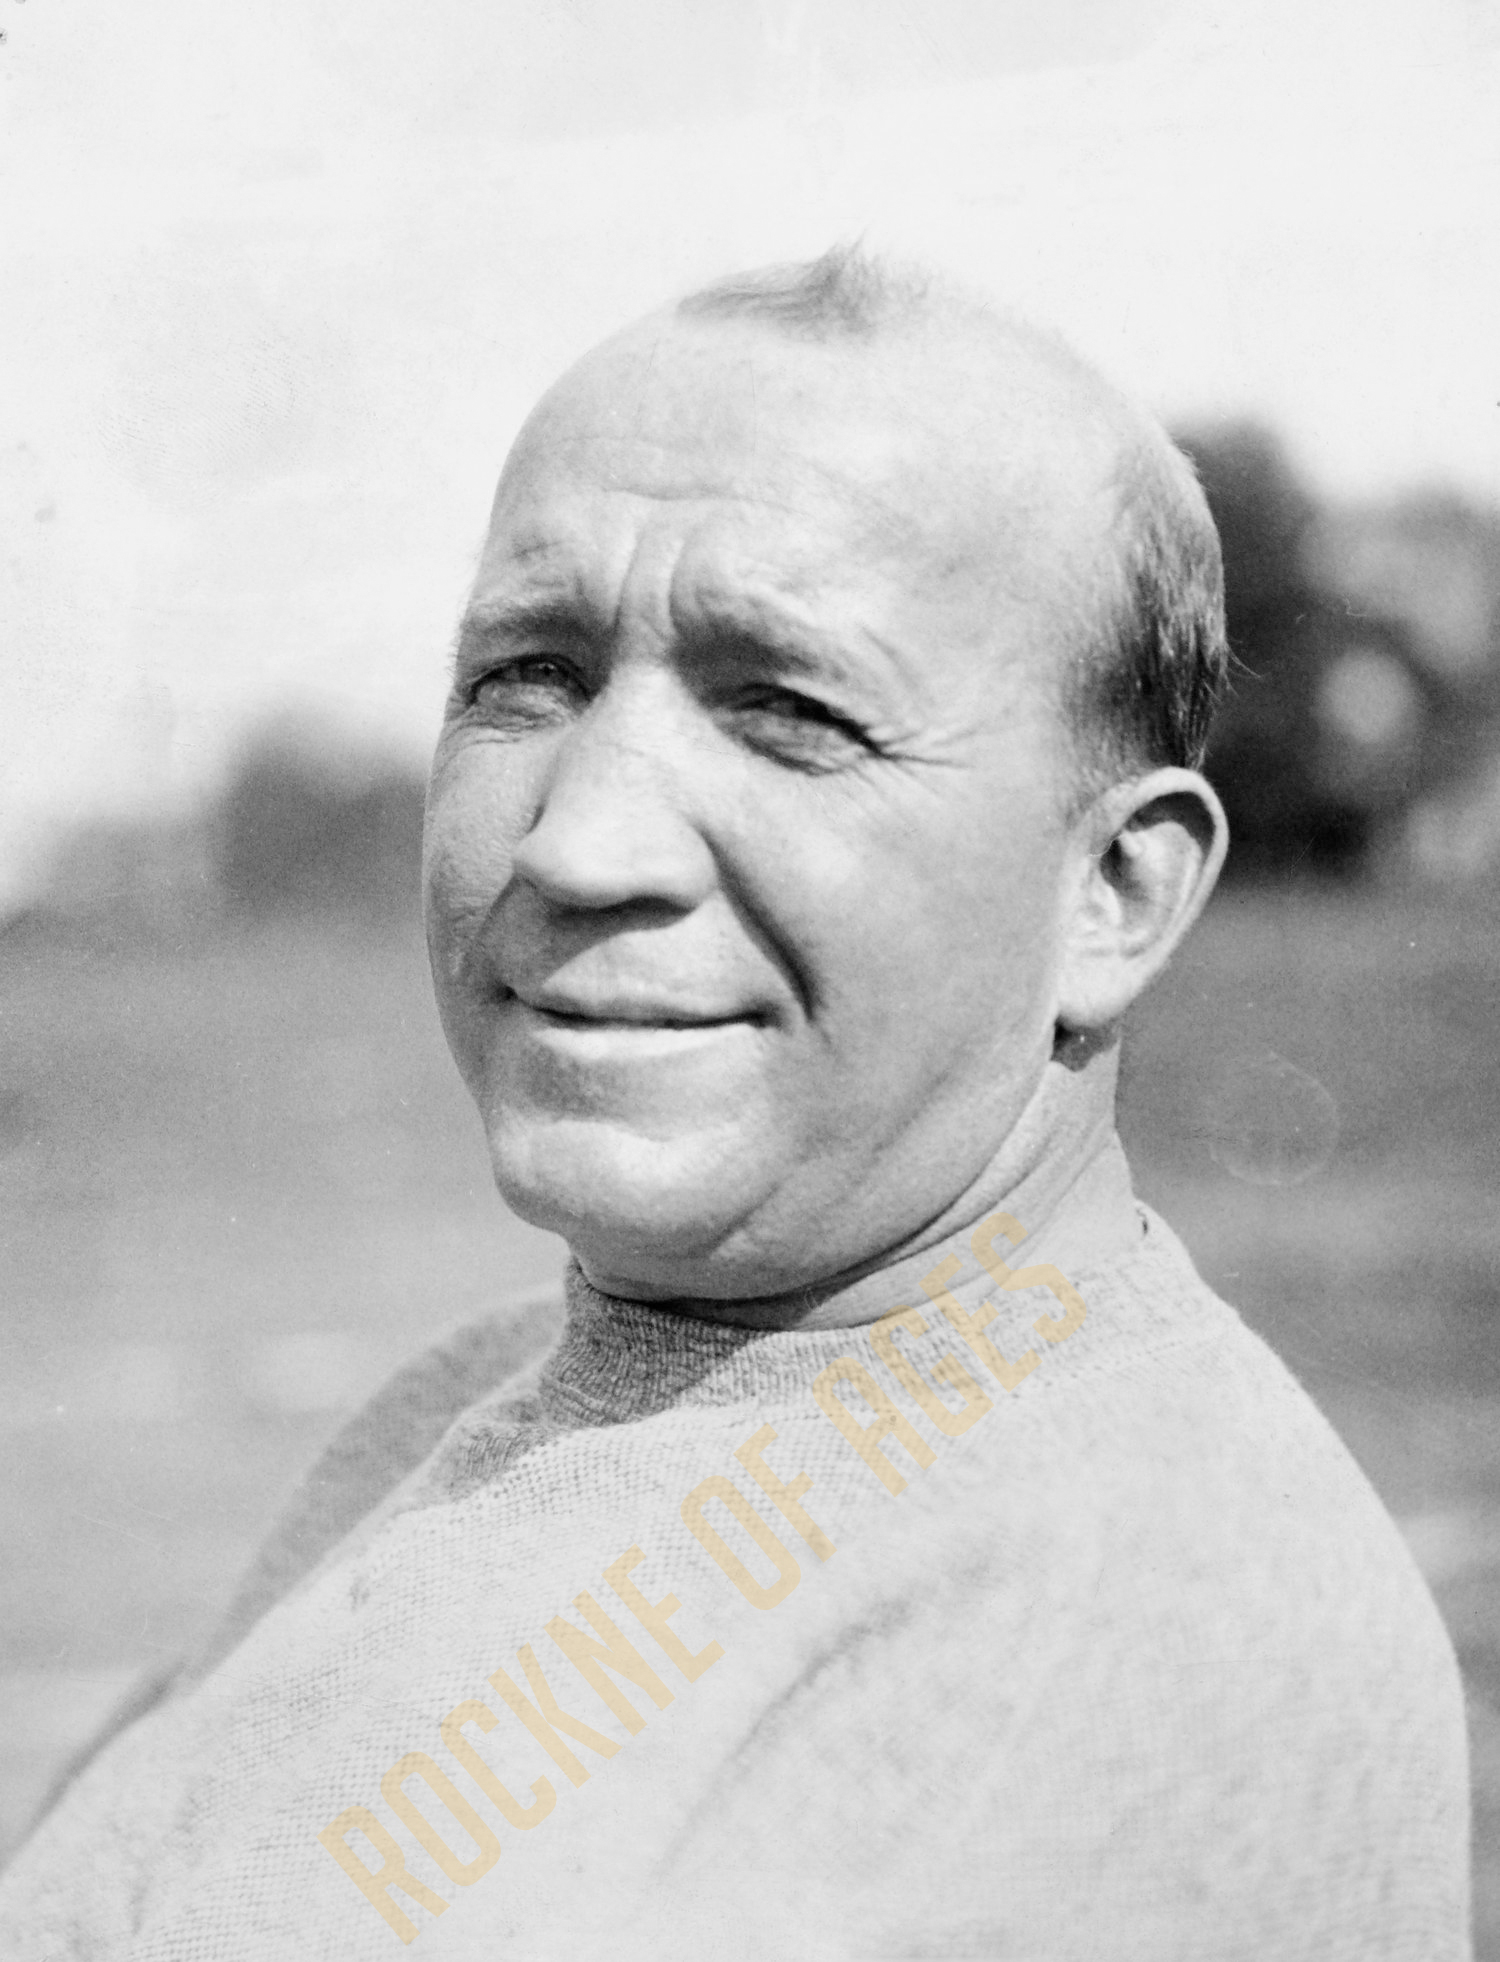  Rockne the coach in a practice session sweatshirt.   